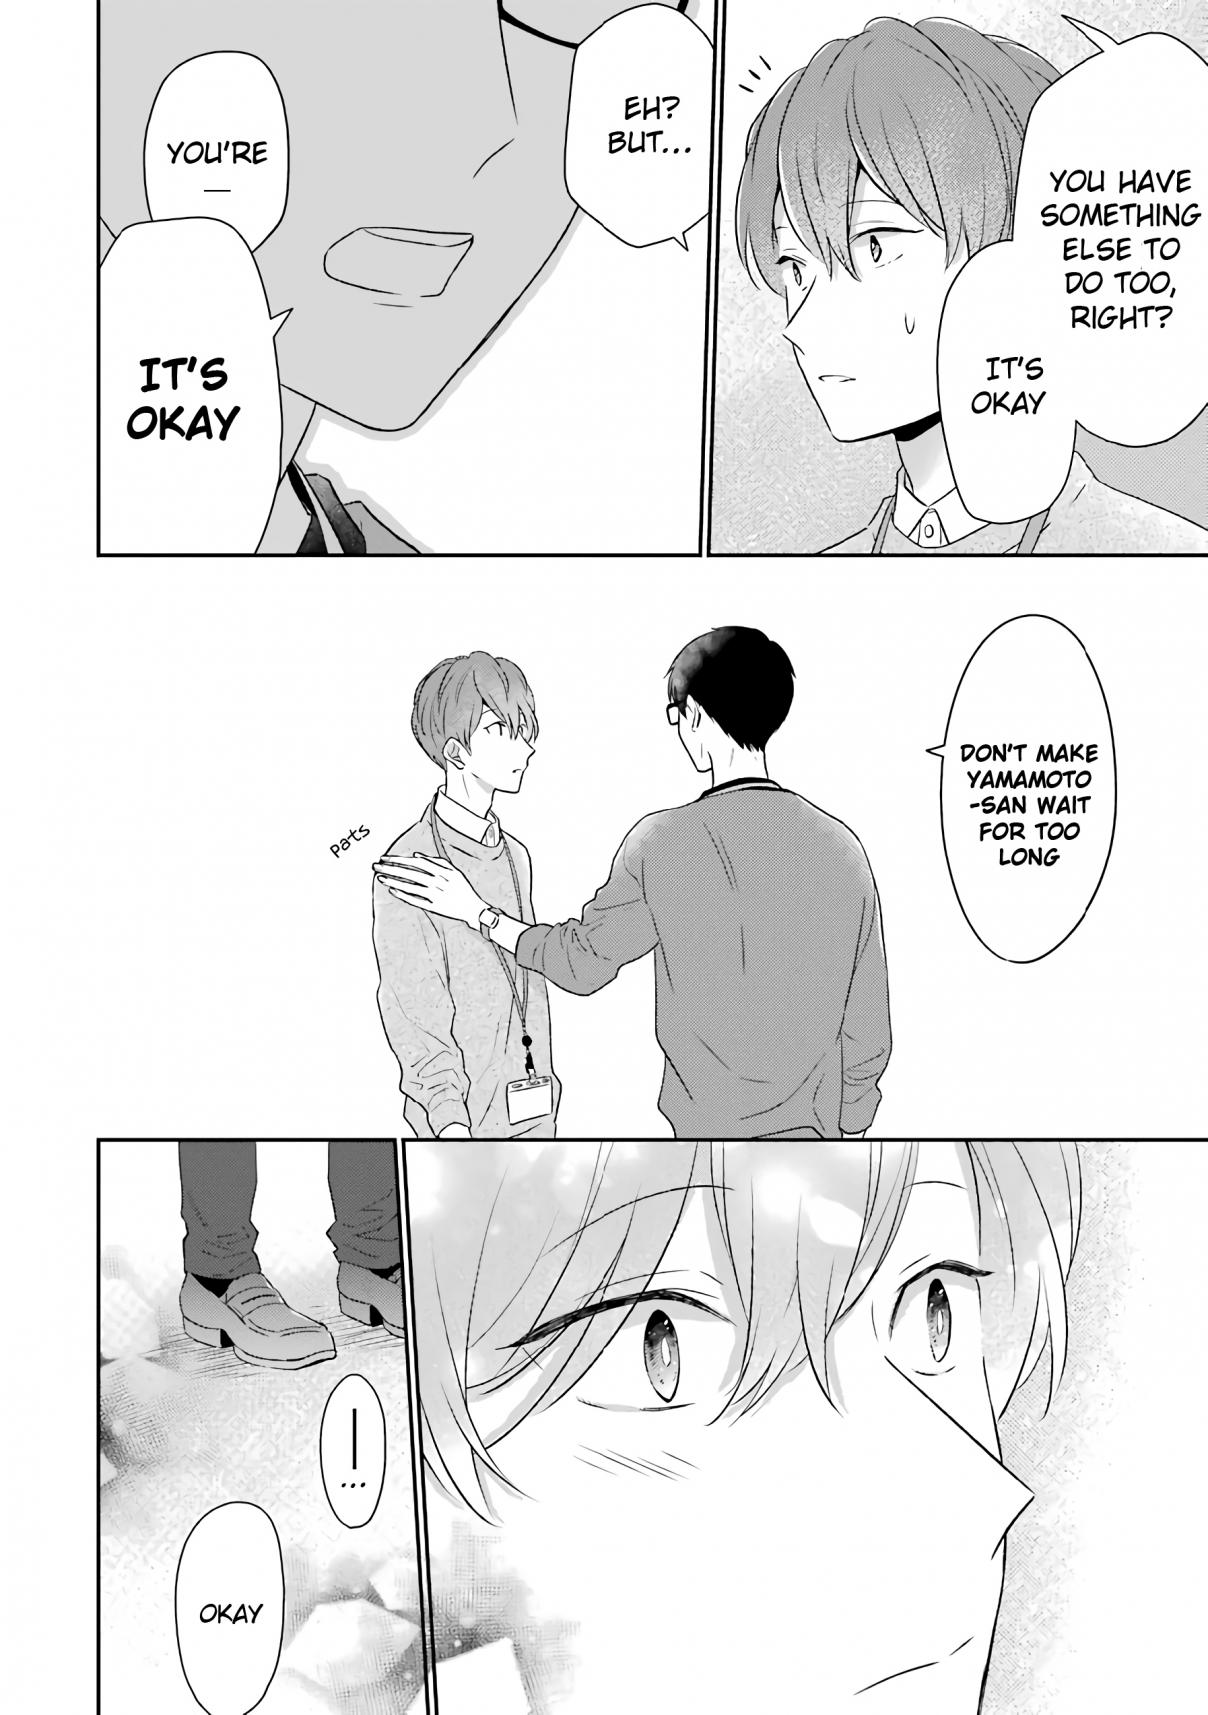 I'm Nearly 30, But This Is My First Love Vol. 4 Ch. 37